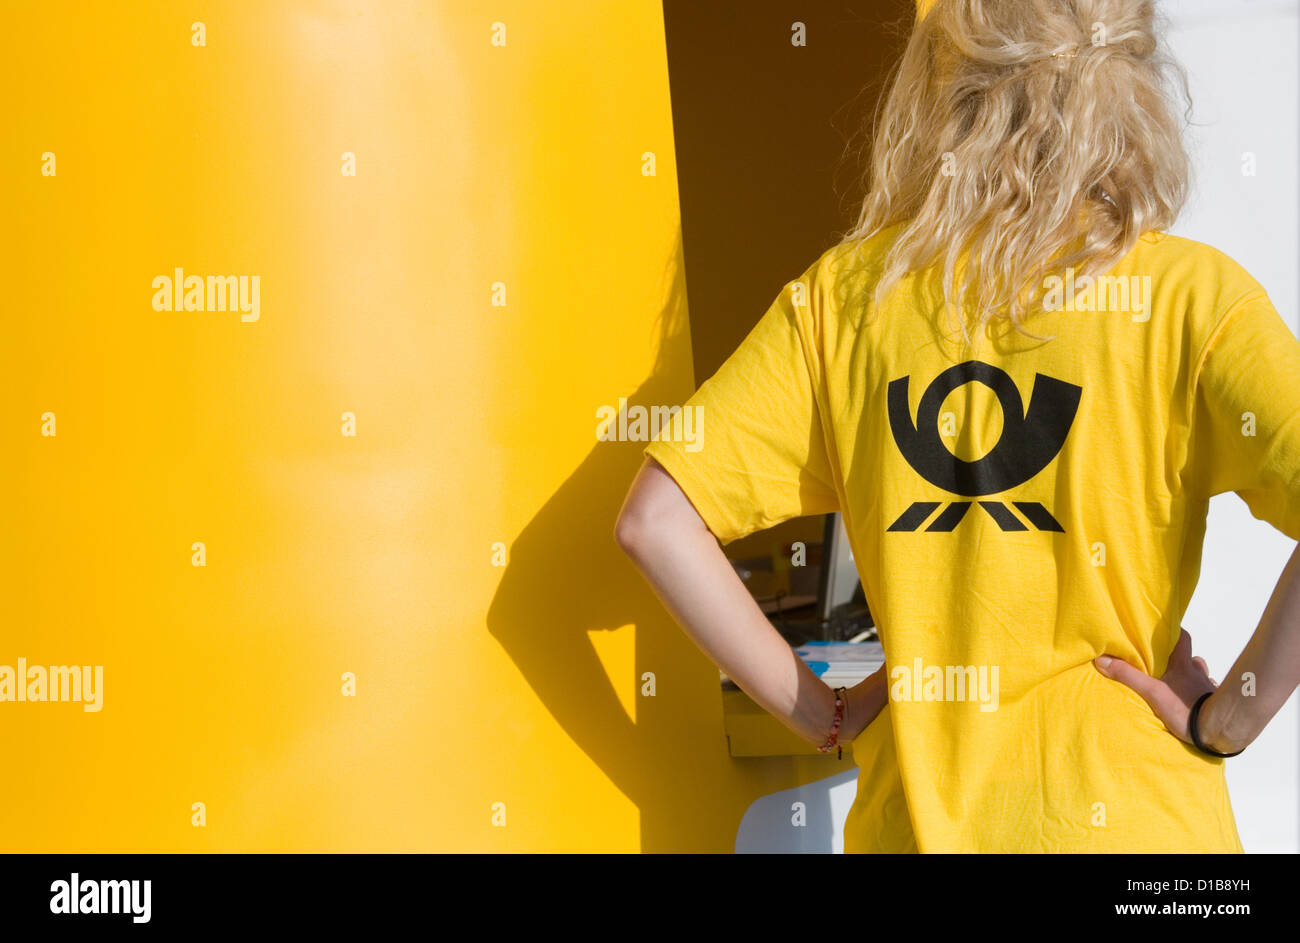 Berlin, Germany, postal logo on a t-shirt of a young woman Stock Photo -  Alamy